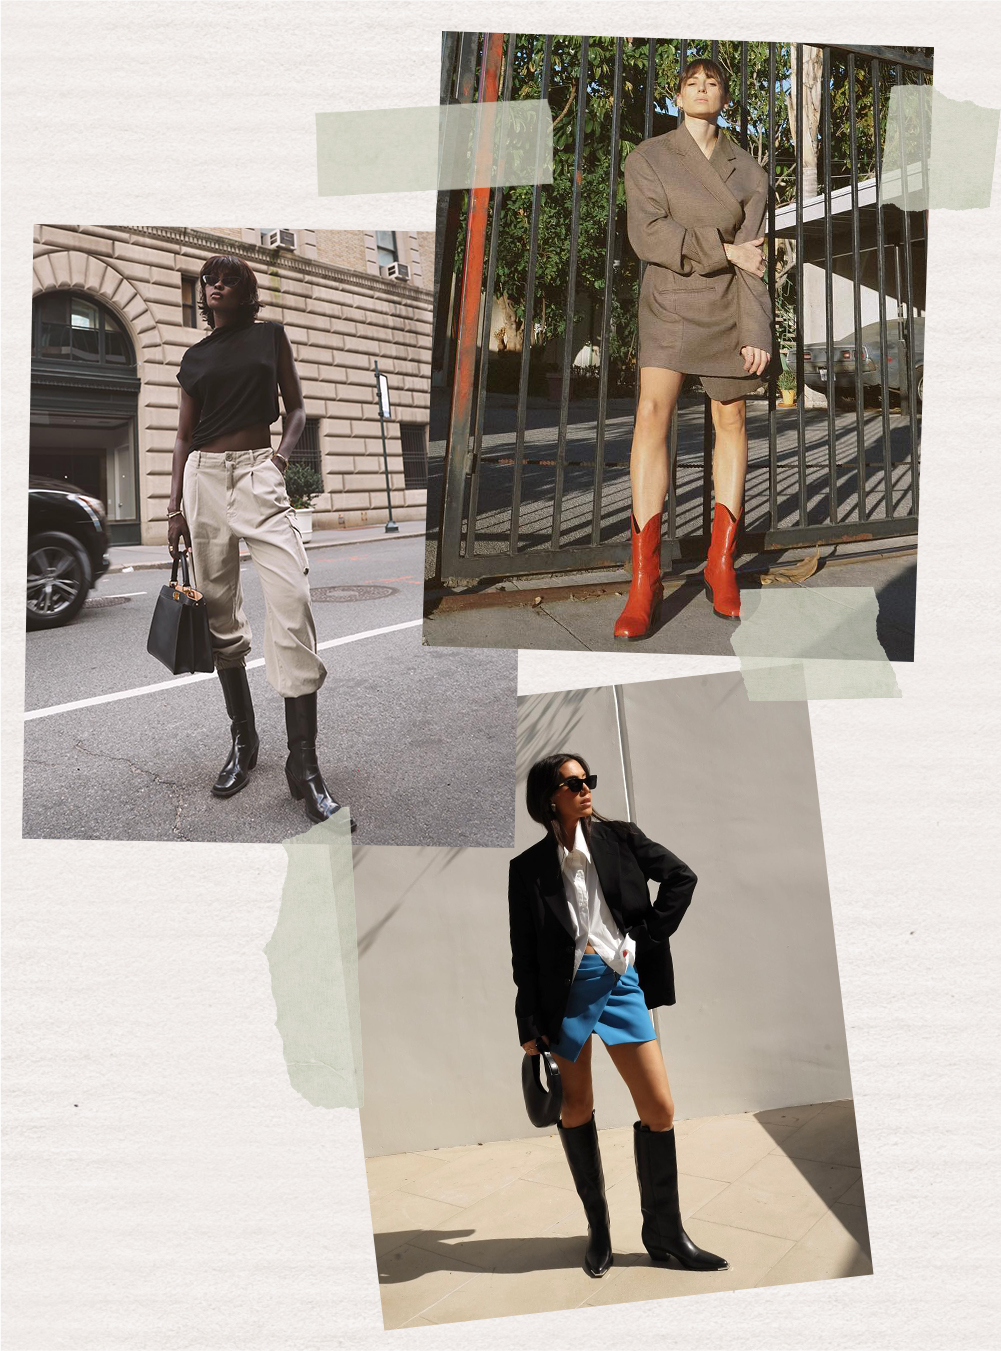 How to Wear Cowboy Boots (The Best Styling Ideas & Tips)